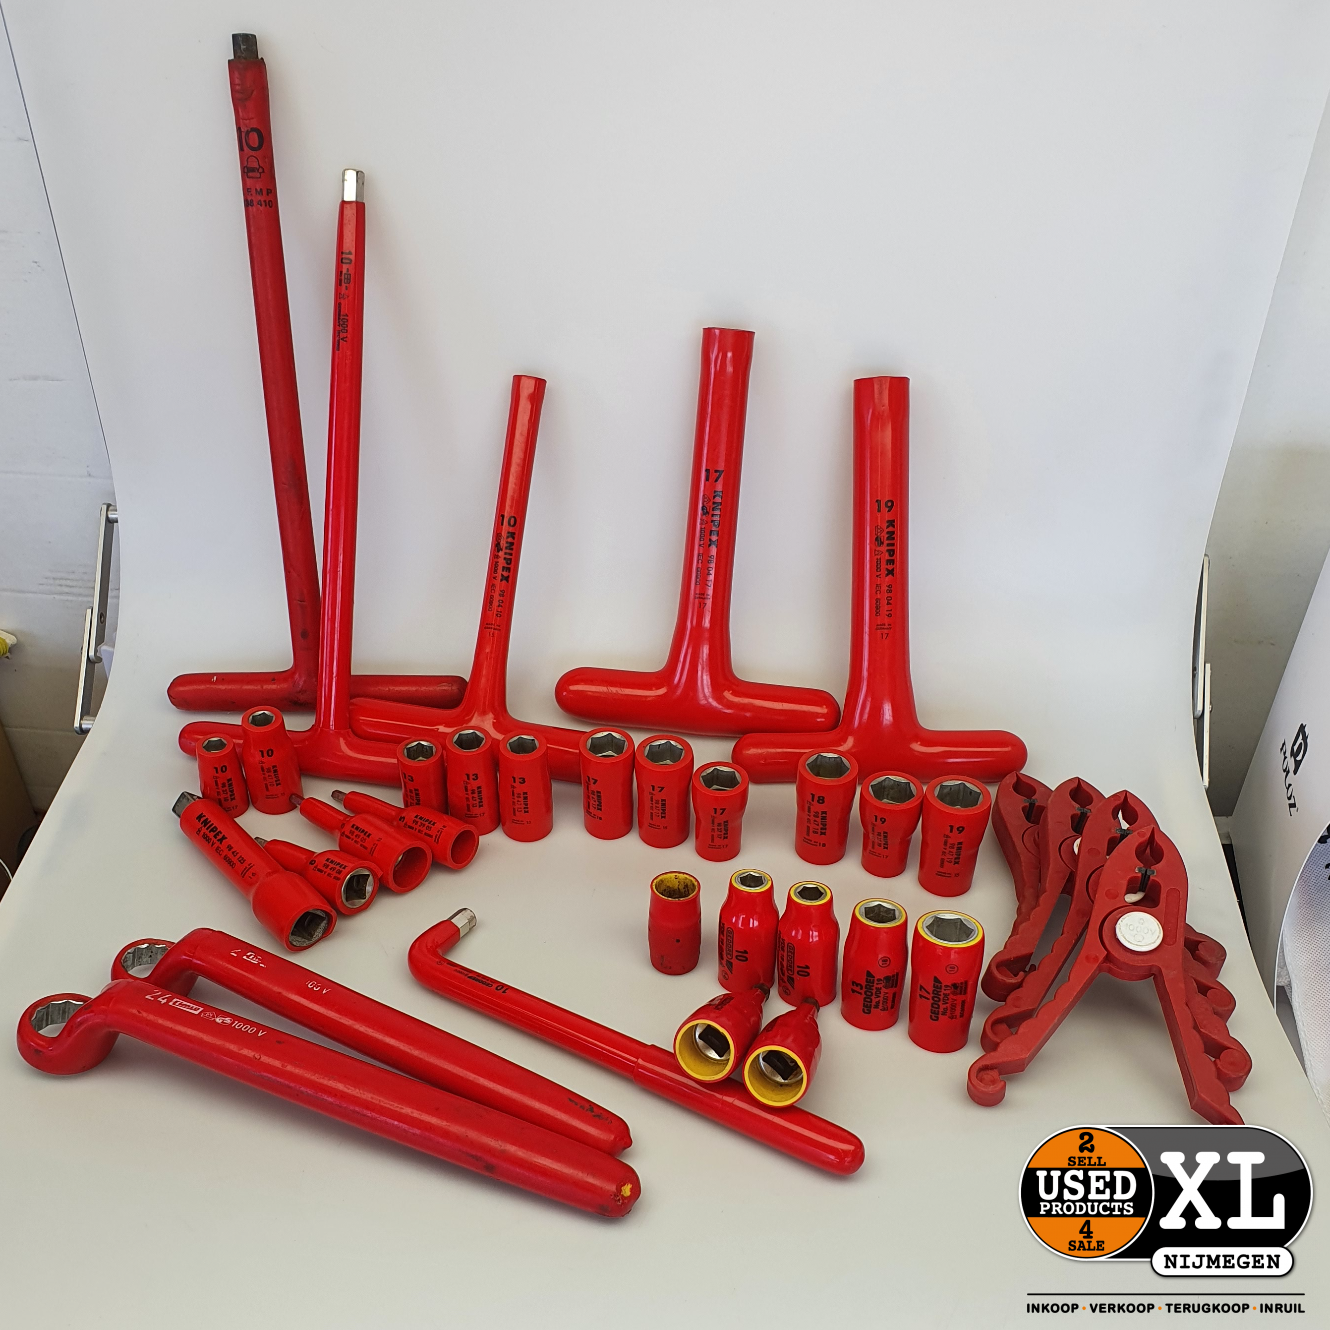 1000v VDE Gereedschap Knipex Gedore | Nette Staat - Used Products Nijmegen XL